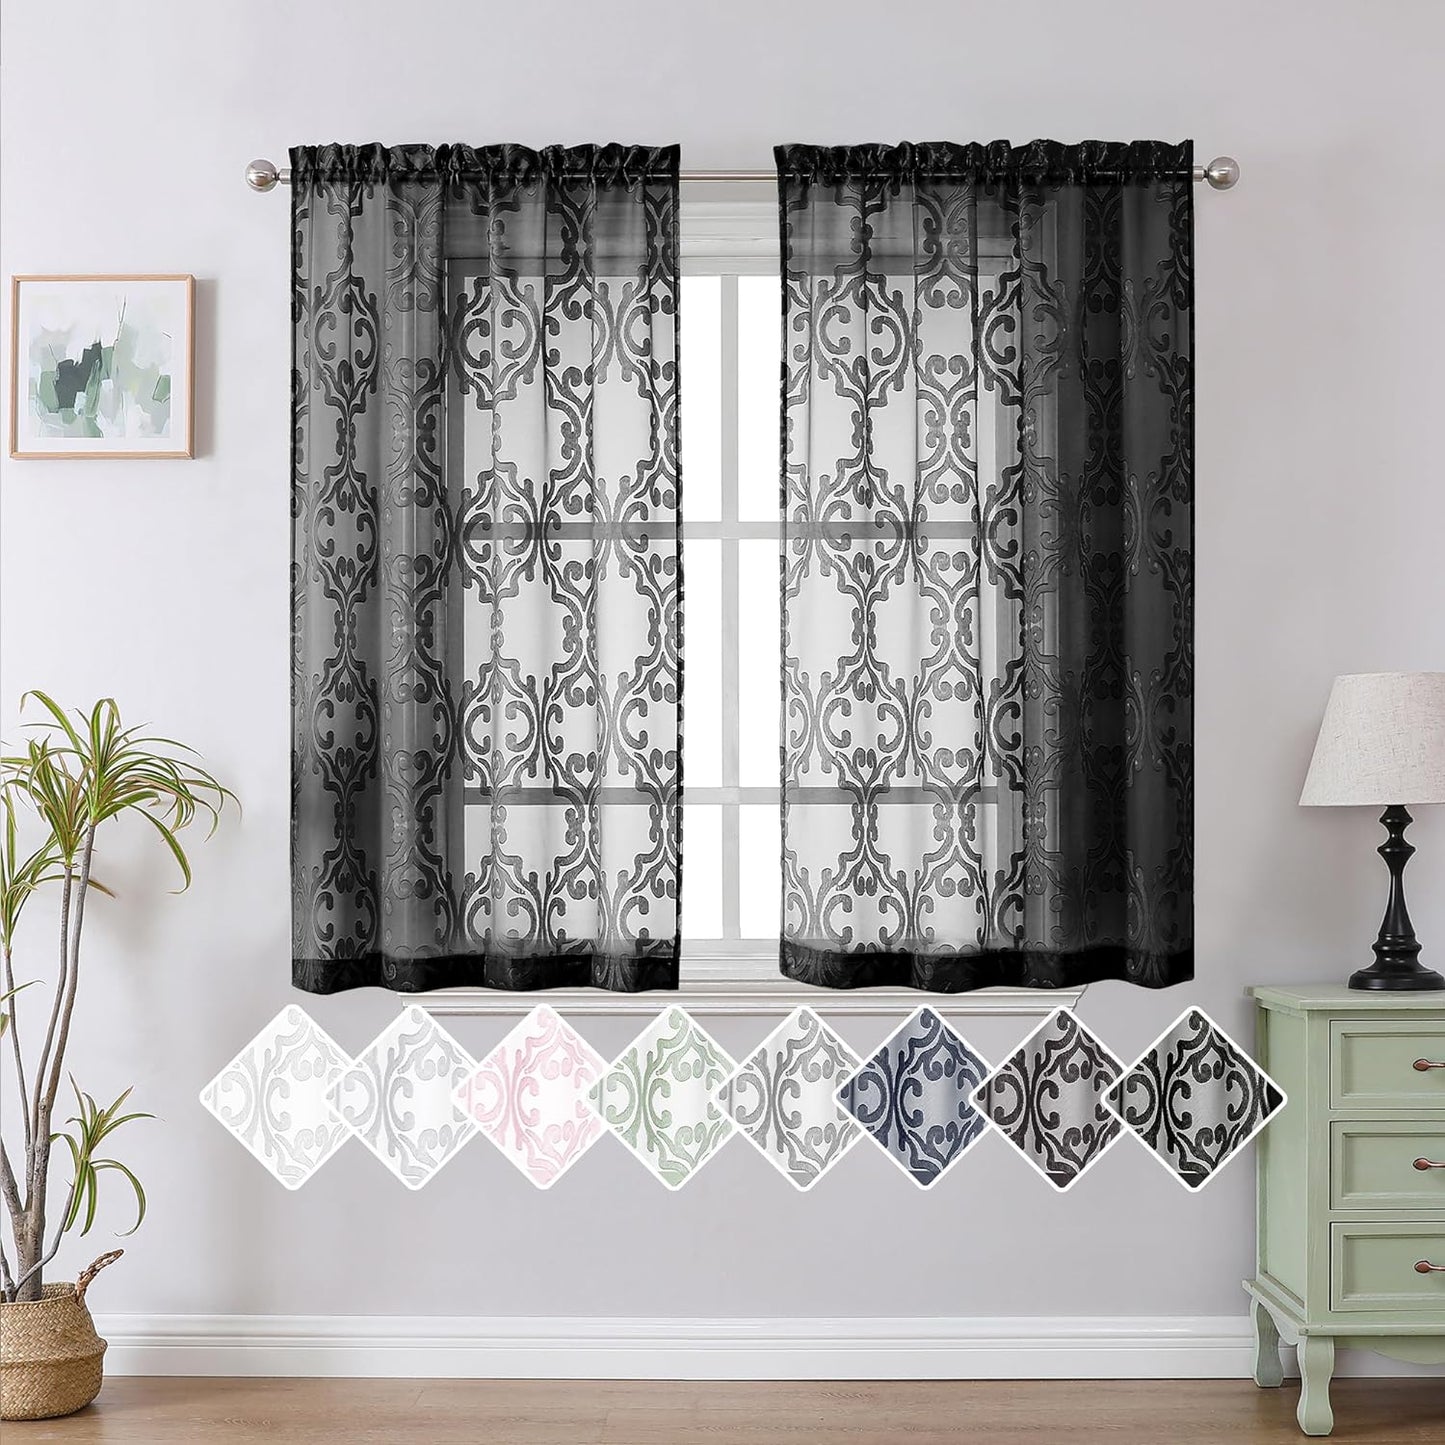 Aiyufeng Suri 2 Panels Sheer Sage Green Curtains 63 Inches Long, Light & Airy Privacy Textured Sheer Drapes, Dual Rod Pocket Voile Clipped Floral Luxury Panels for Bedroom Living Room, 42 X 63 Inch  Aiyufeng Black 2X42X45" 